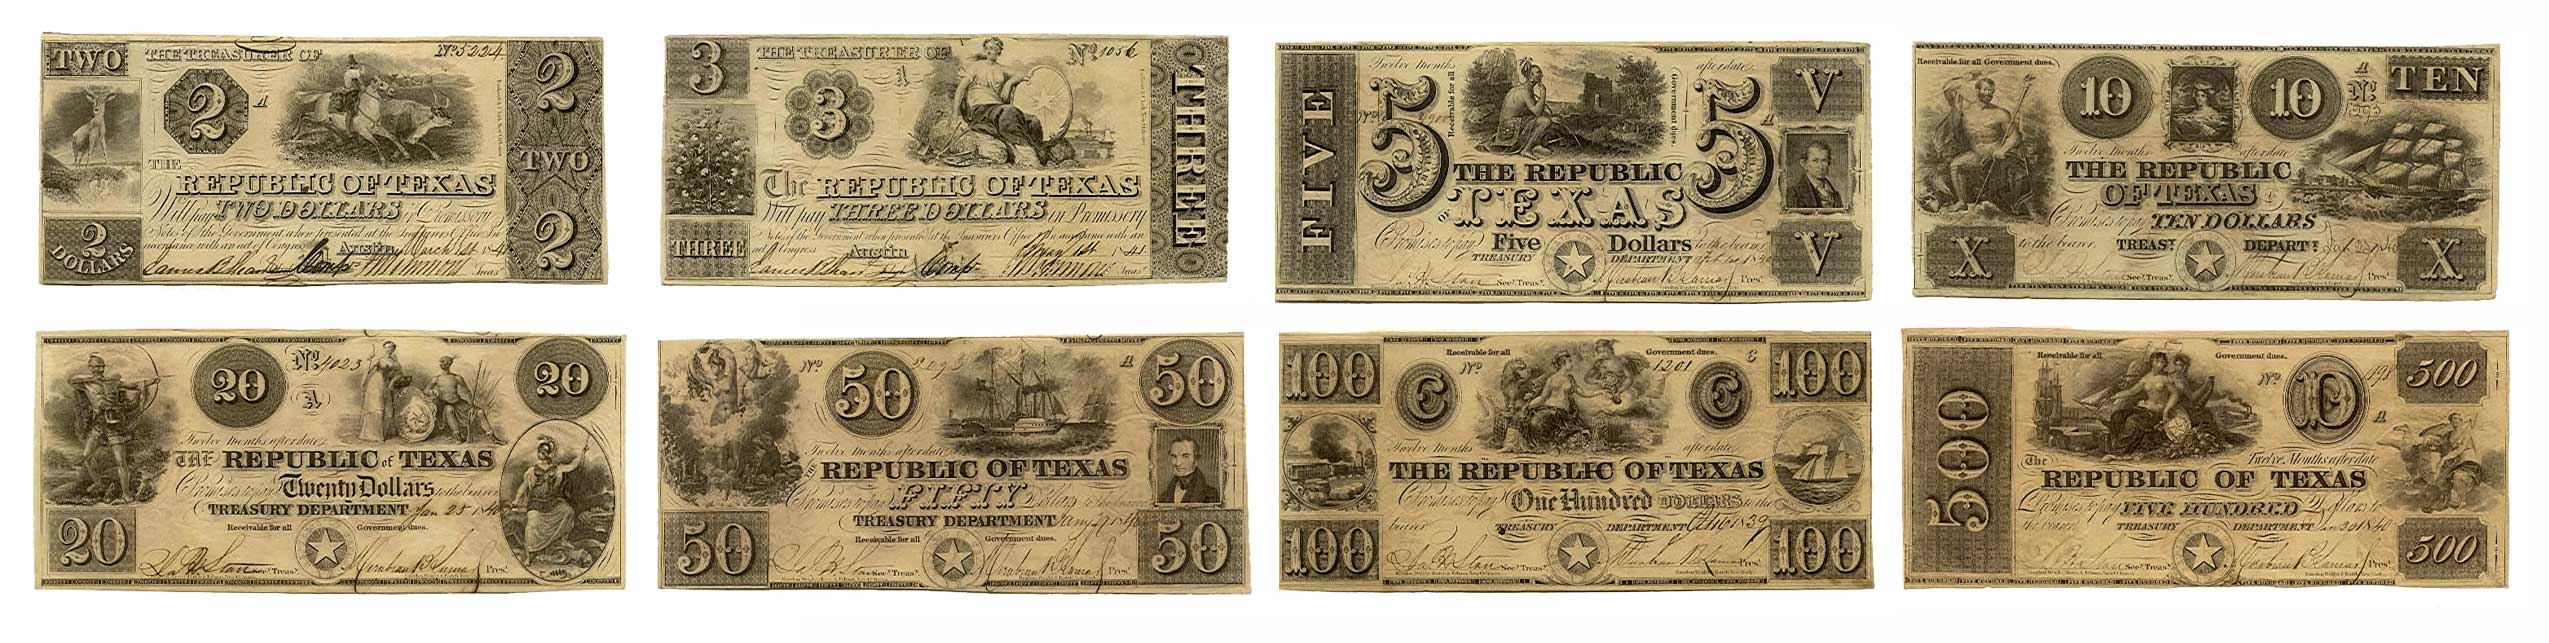 Texas Currency 2-500